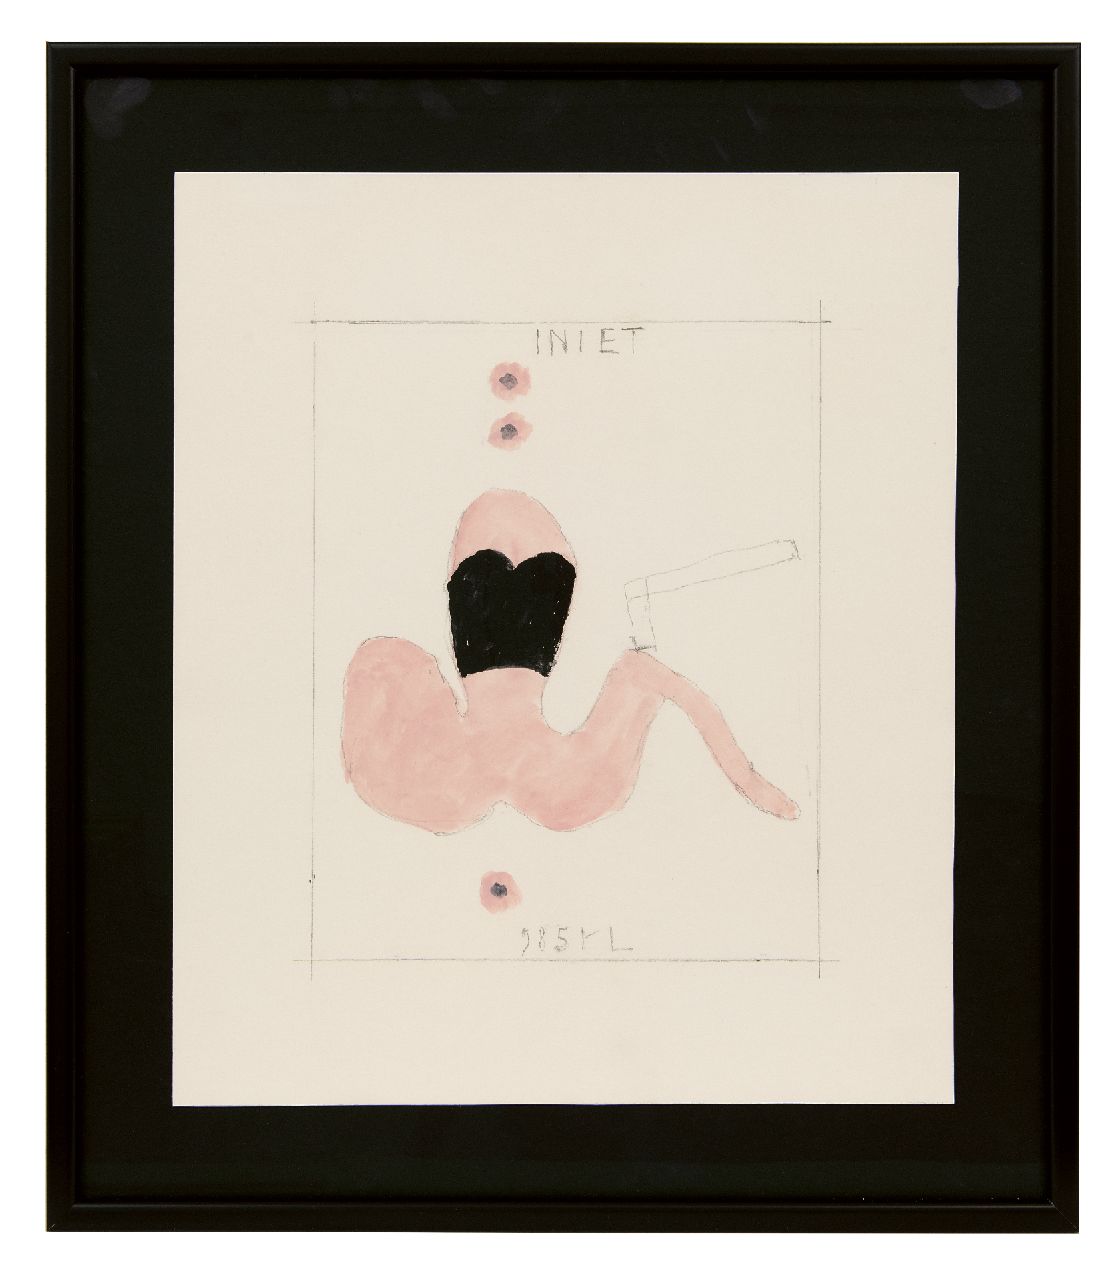 Lucassen R.  | Reinier Lucassen | Watercolours and drawings offered for sale | The spirit of the Iniet, pencil and watercolour on paper 31.0 x 24.7 cm, signed l.c. with initials and in full on the reverse and dated l.c. 985 and '85 on the reverse